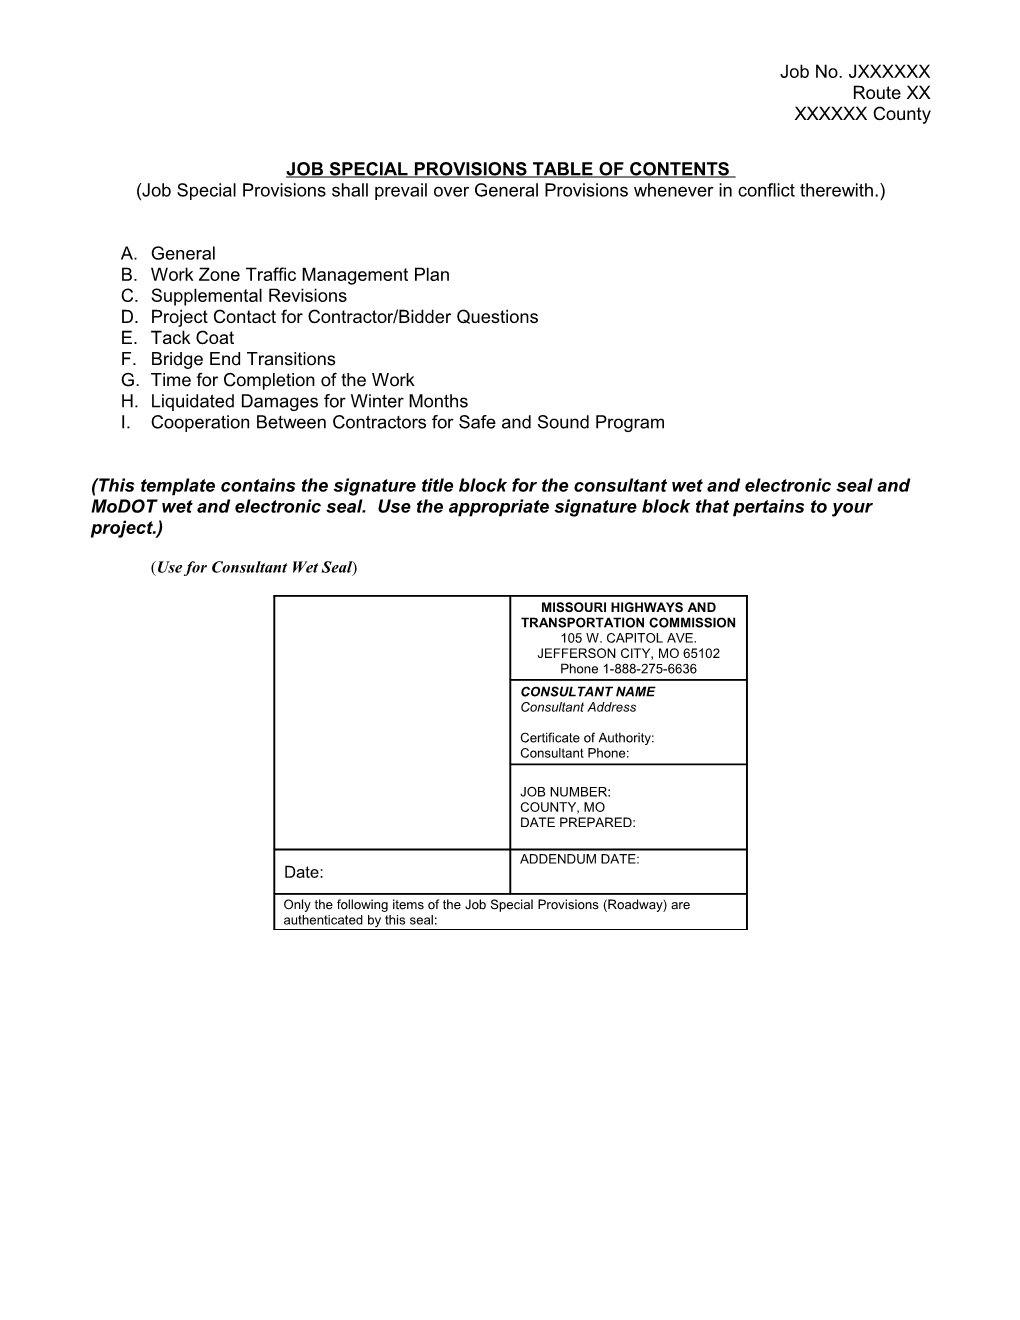 Job Special Provisions Table of Contents (Roadway) s2